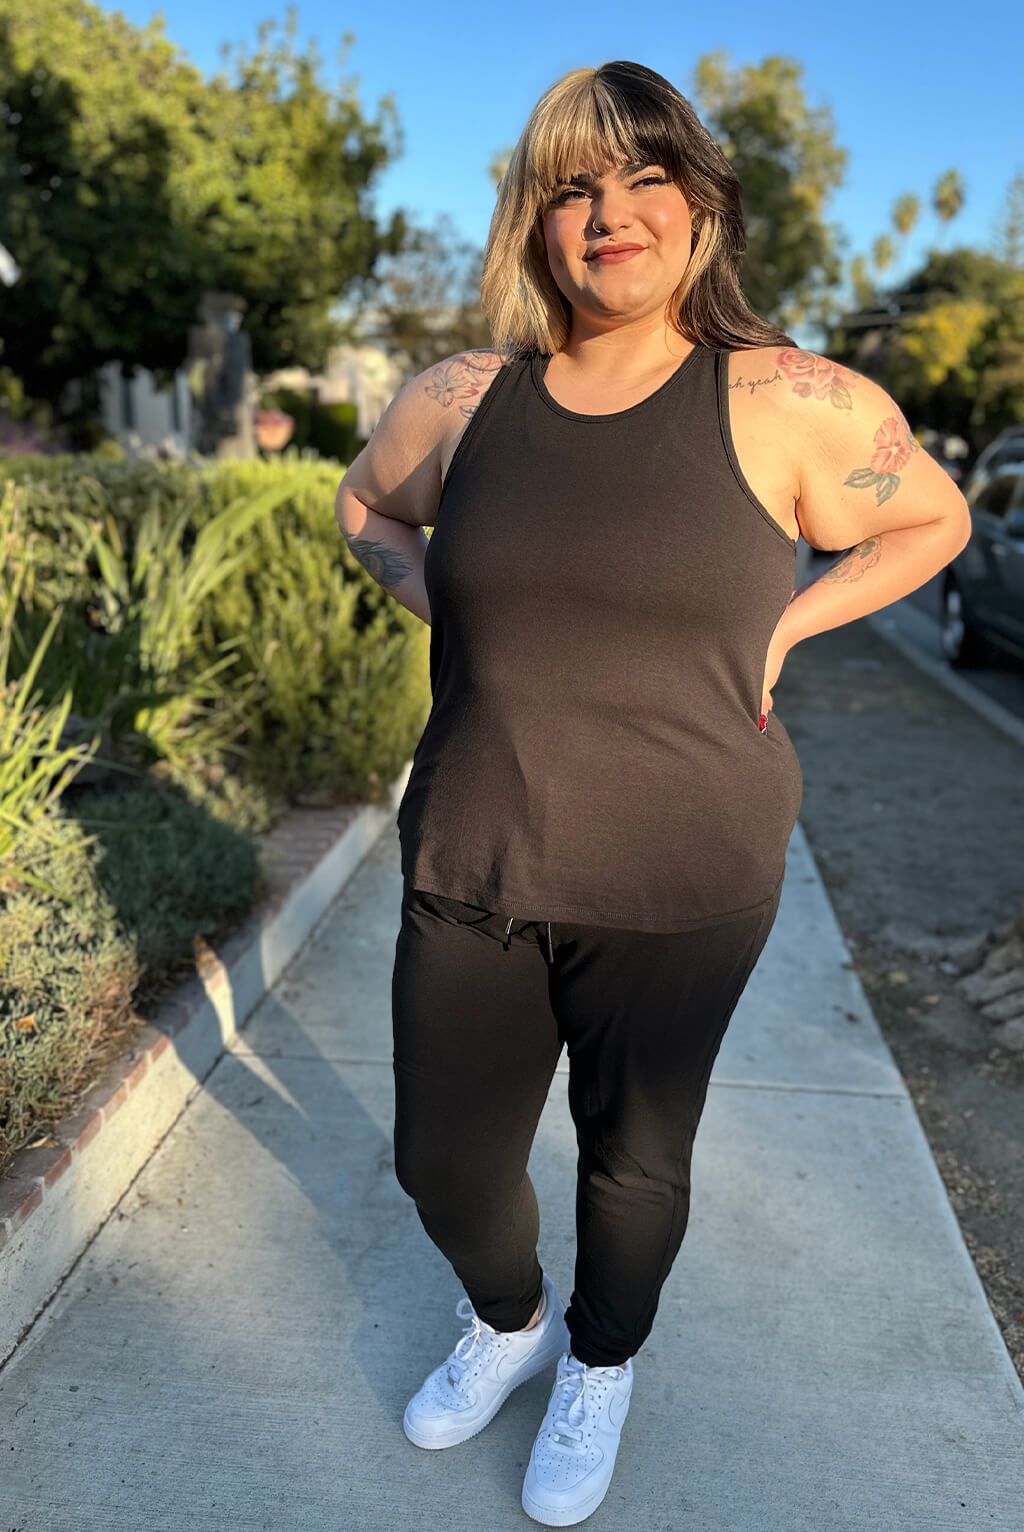 Ribbed Back Flow Tank Top in color Black by Athleisure Collection.